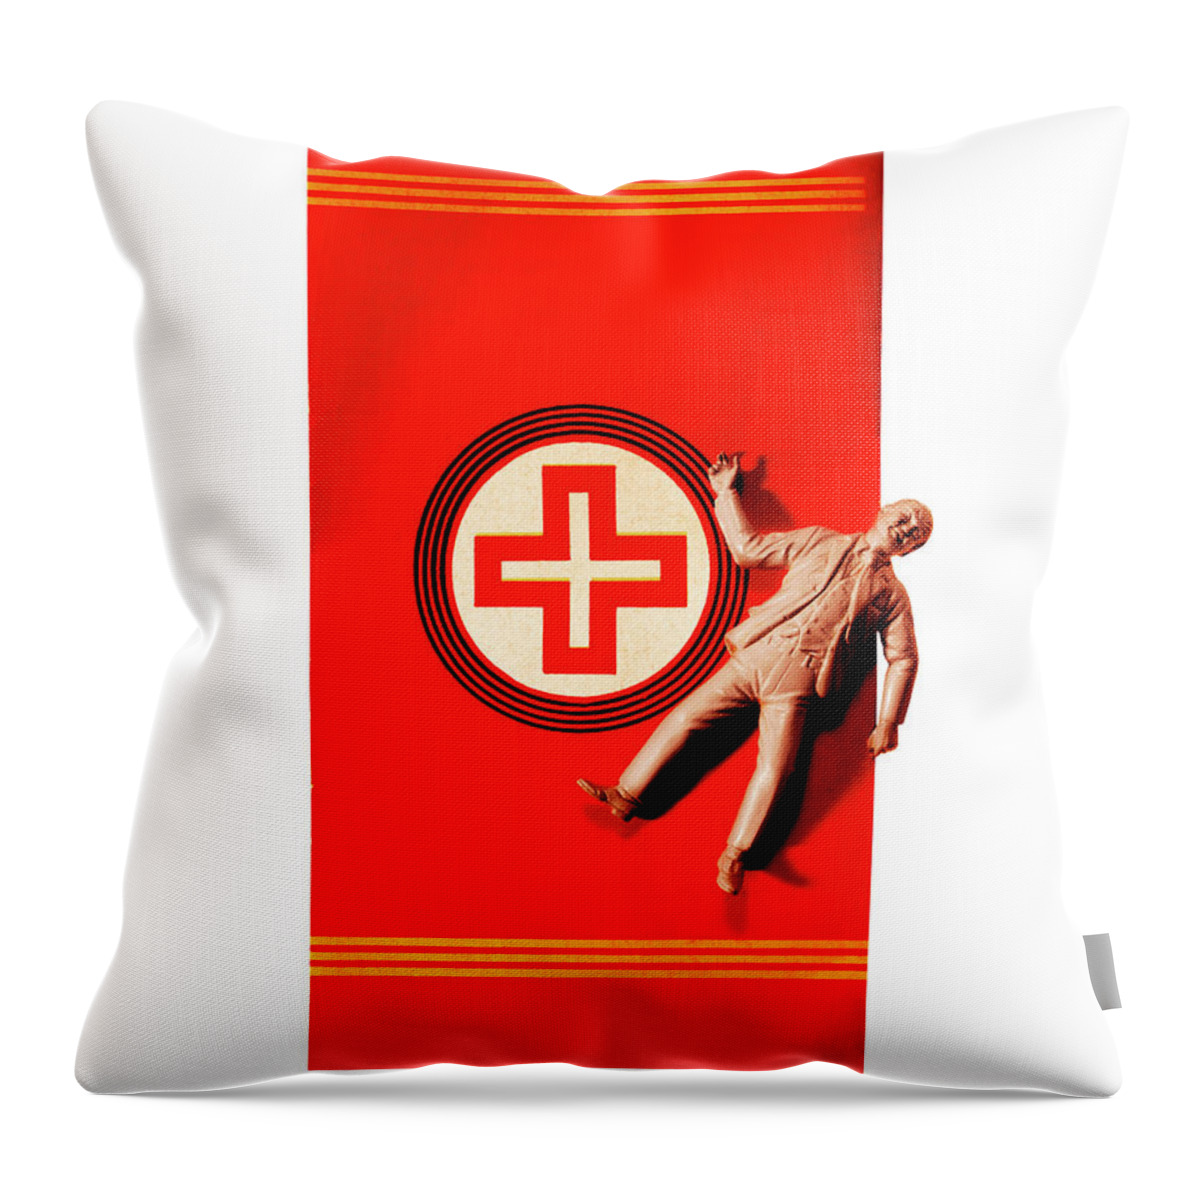 Accident Throw Pillow featuring the drawing Plastic Male Figurine Lying on a Red Flag by CSA Images